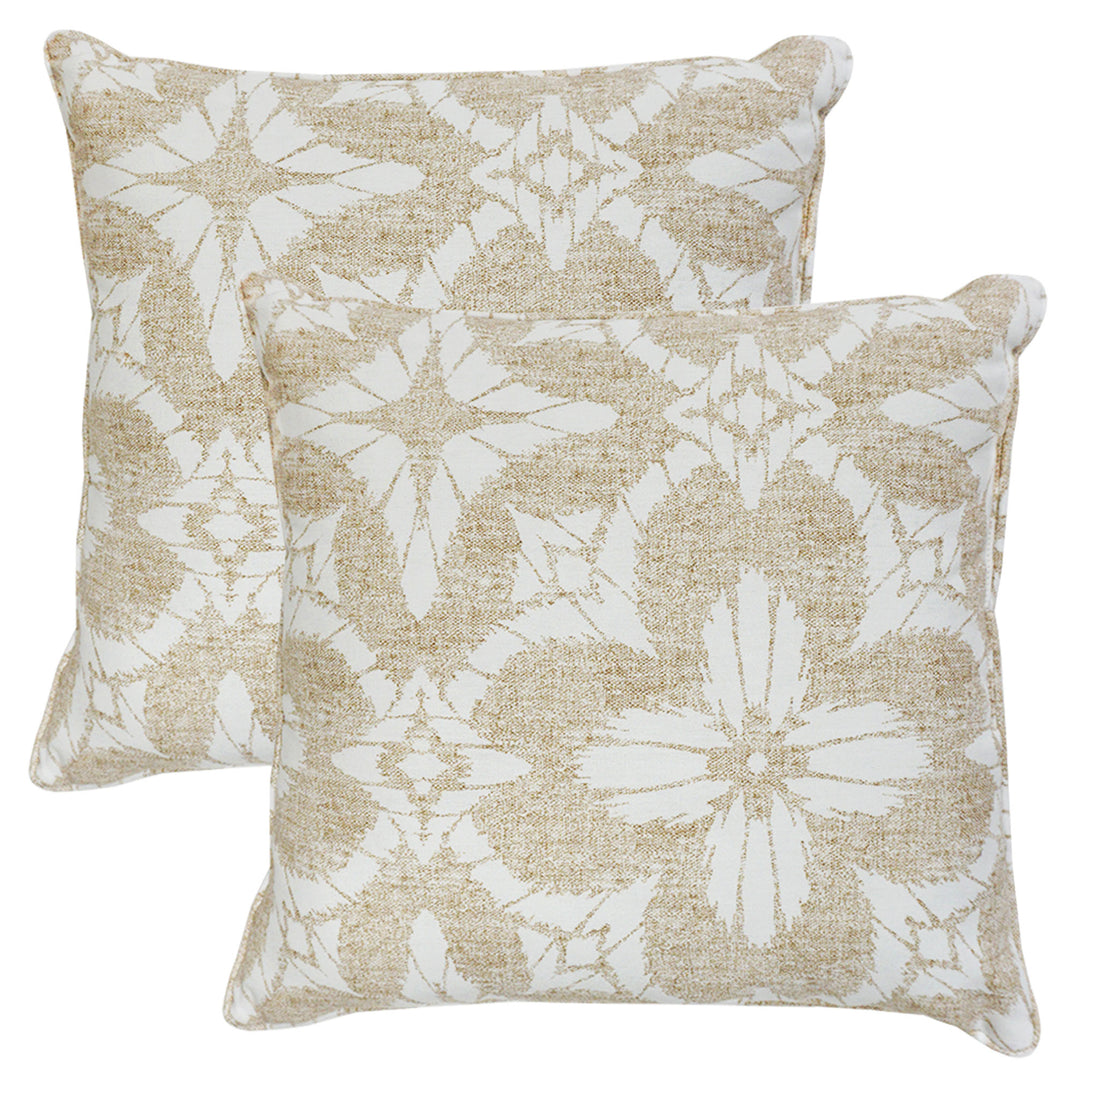 Set of 2 Lily Indoor/Outdoor Throw Pillows | Natural | 18"x18"